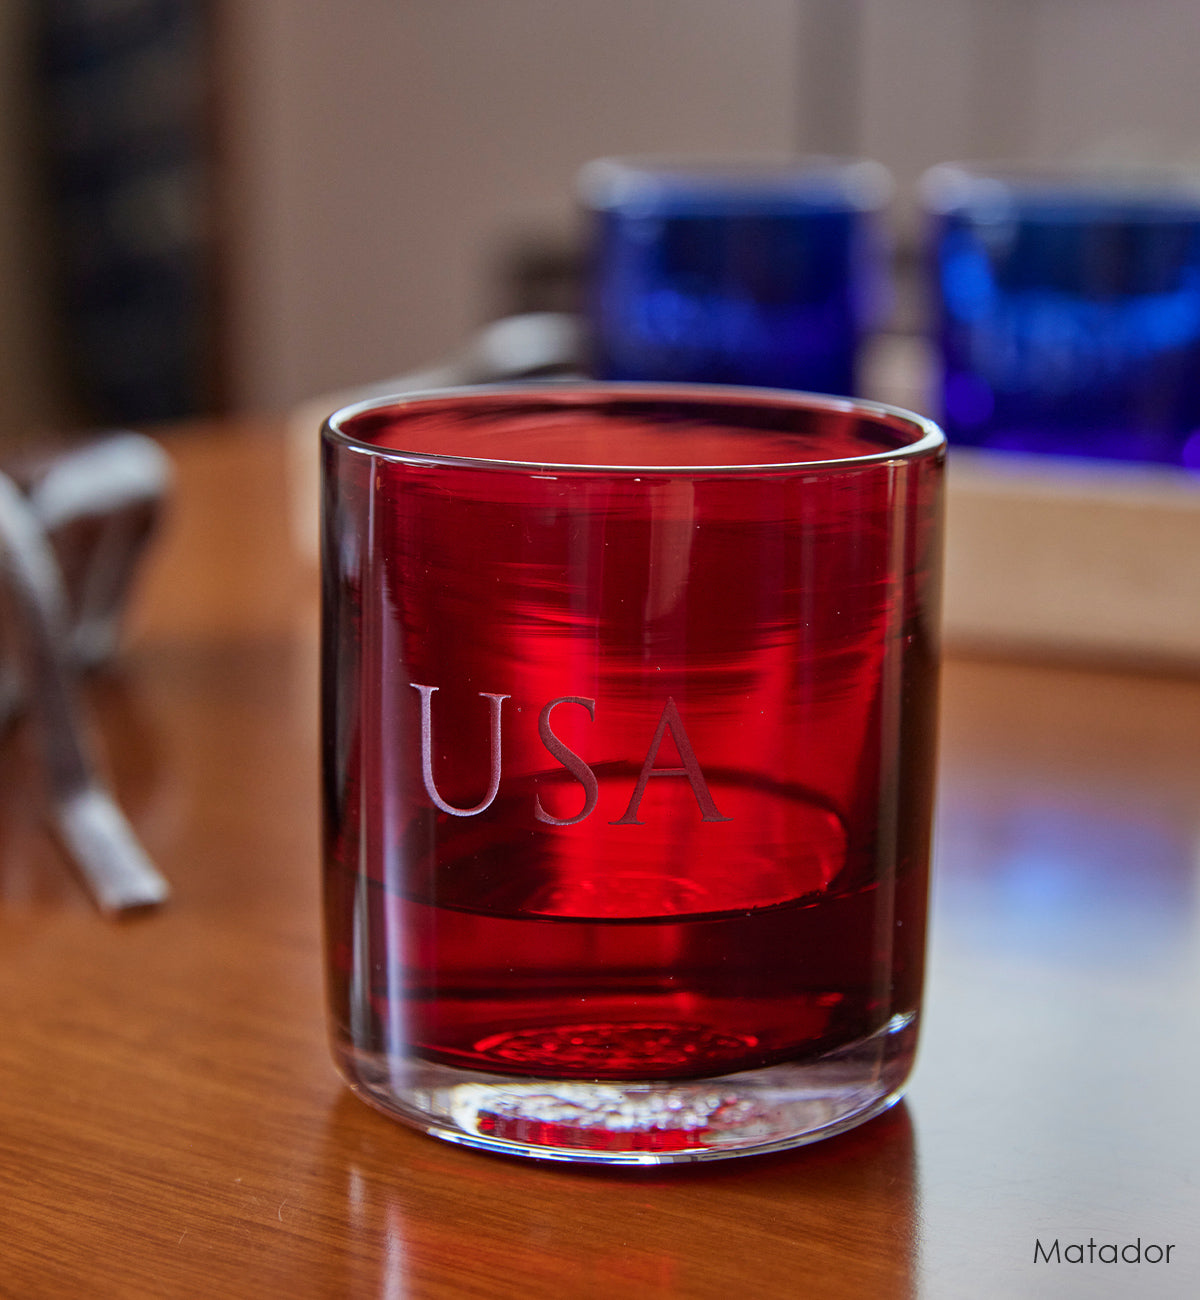 Matador rocker, dark red crimson transparent hand-blown glass lowball drinking glass with the word 'USA' custom etched. sitting on a wood table with two Deep Sea rockers in background.